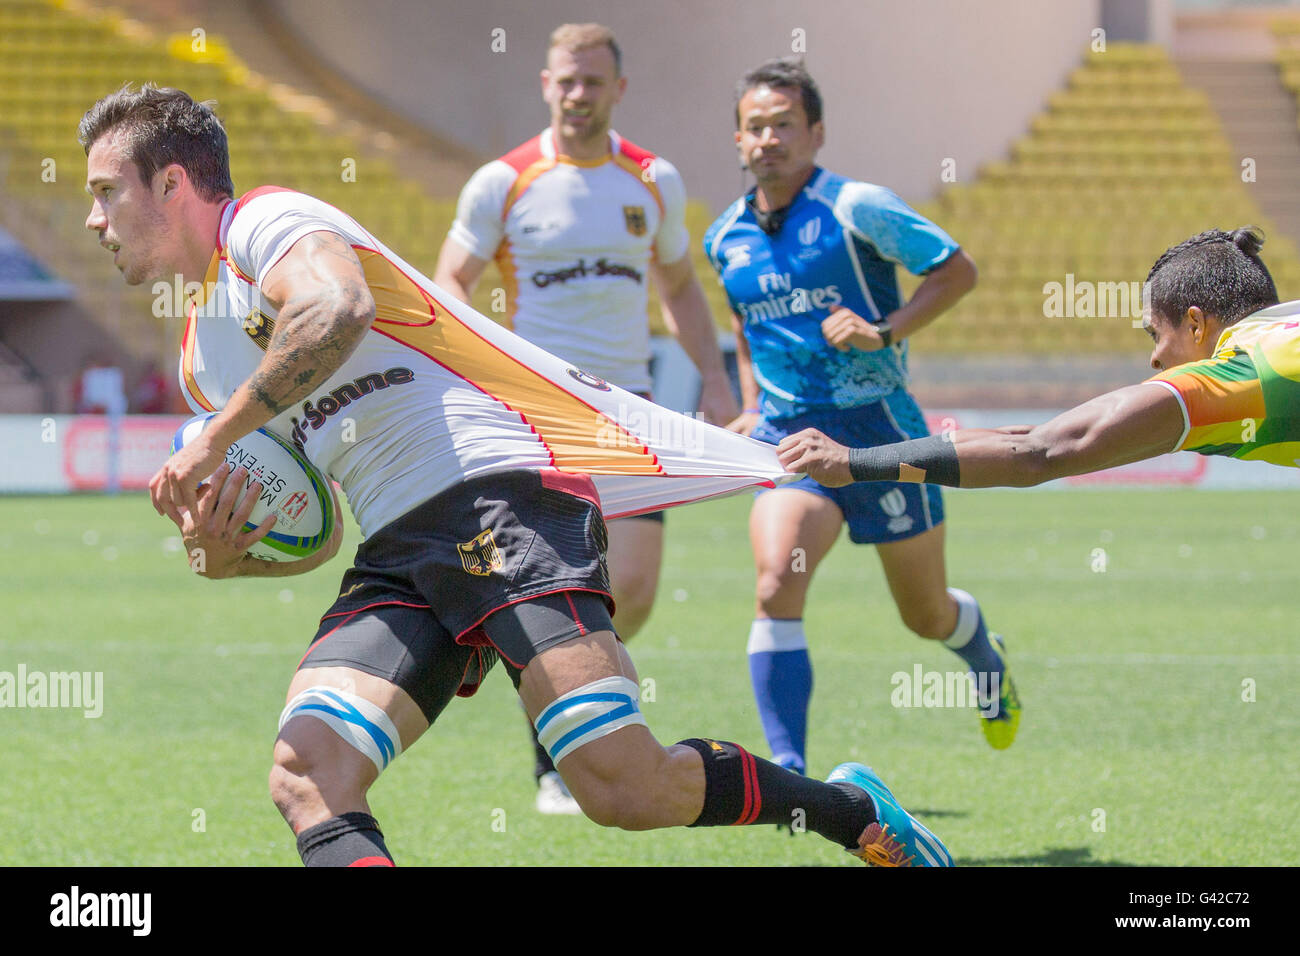 A picture dated 19 June 2016 shows Tim Biniak (Germany, l) being held up by Richard Dharmapala (Sri Lanka, r) in the match Sri Lanka vs. Germany at the rugby Olympia qualification tournament in Monaco. Photo: Juergen Kessler/dpa - NO WIRE SERVICE - Stock Photo